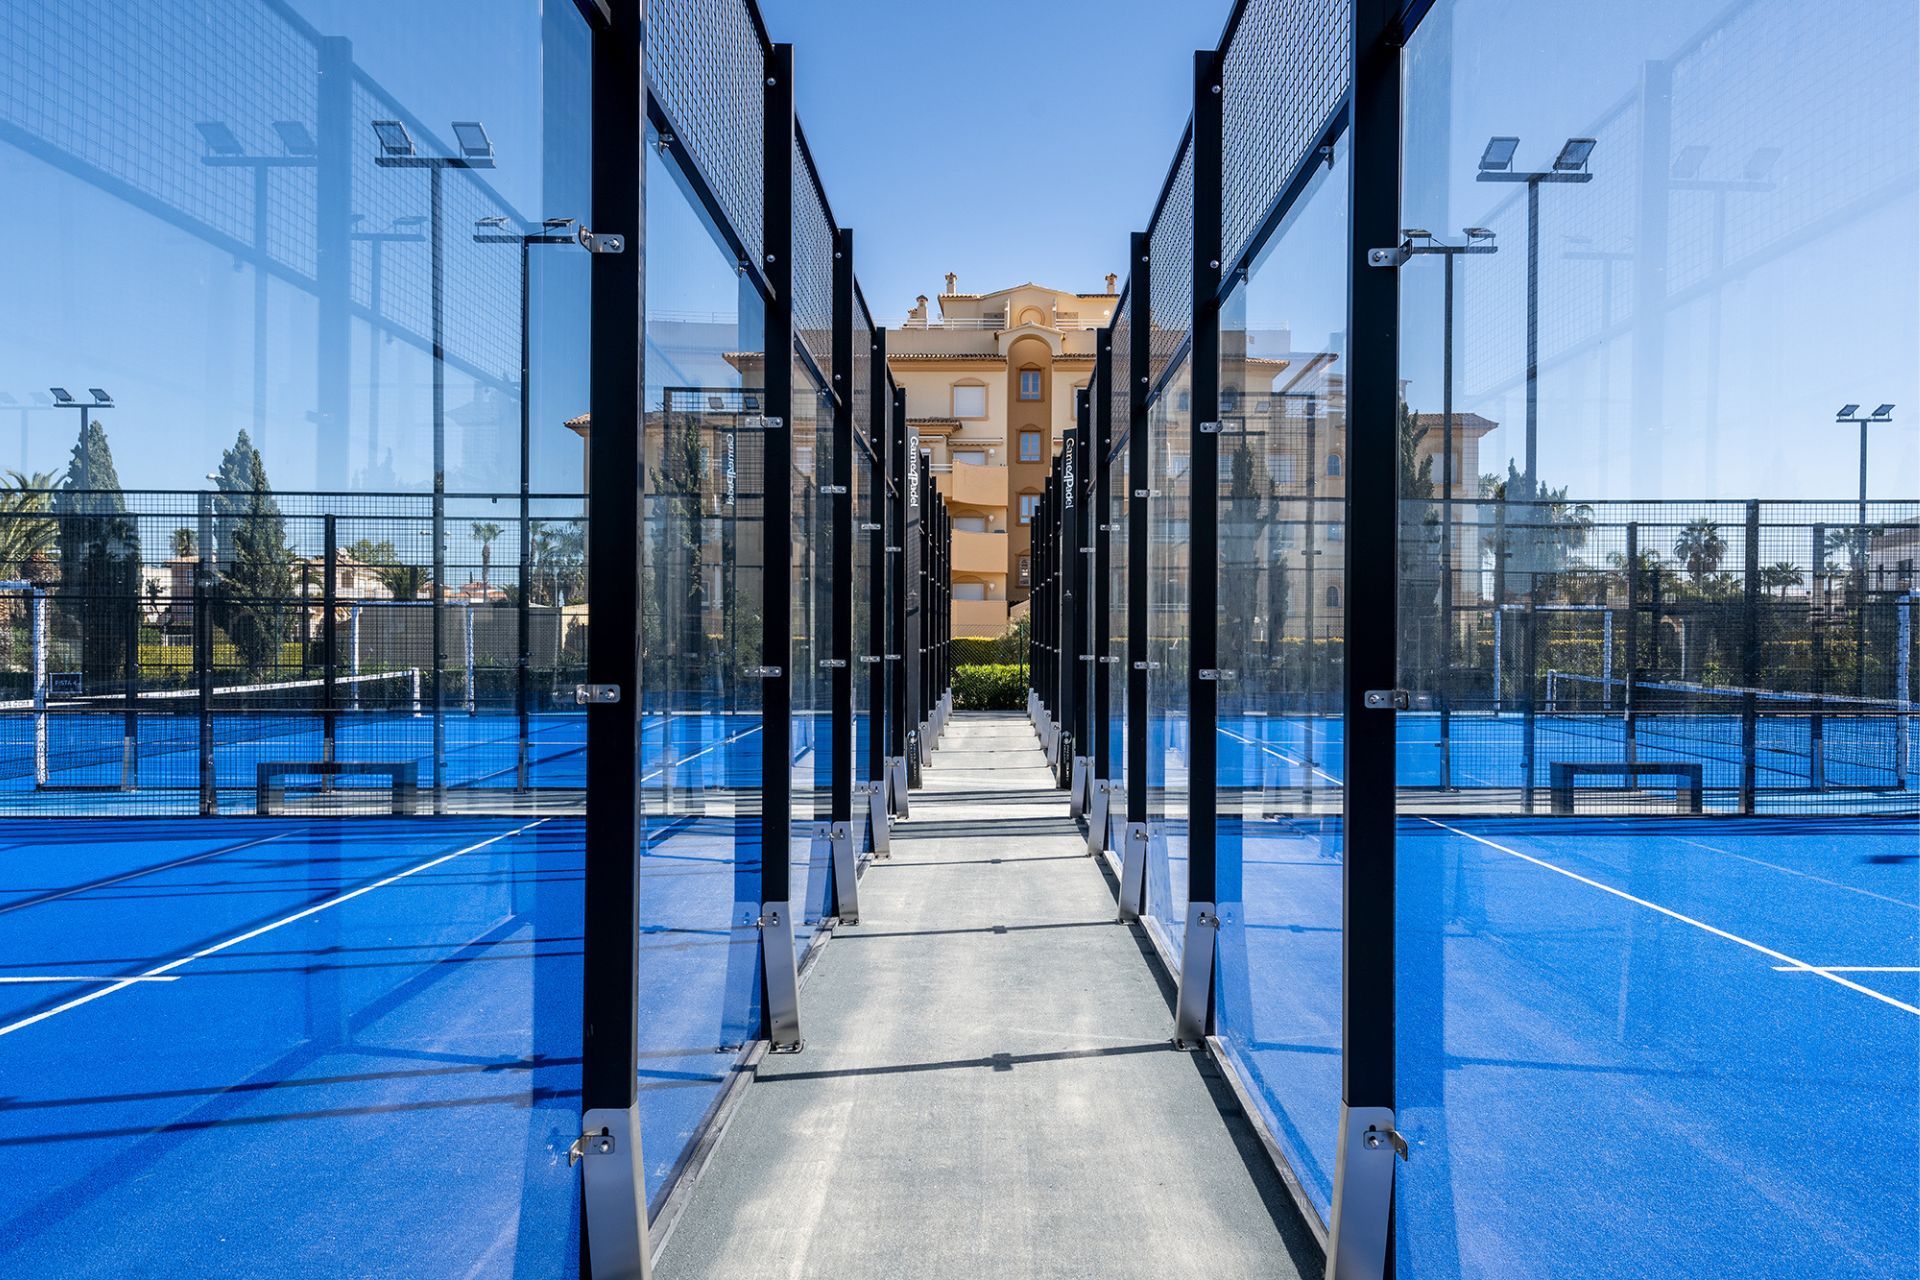 Padel courts with palm trees in the background.